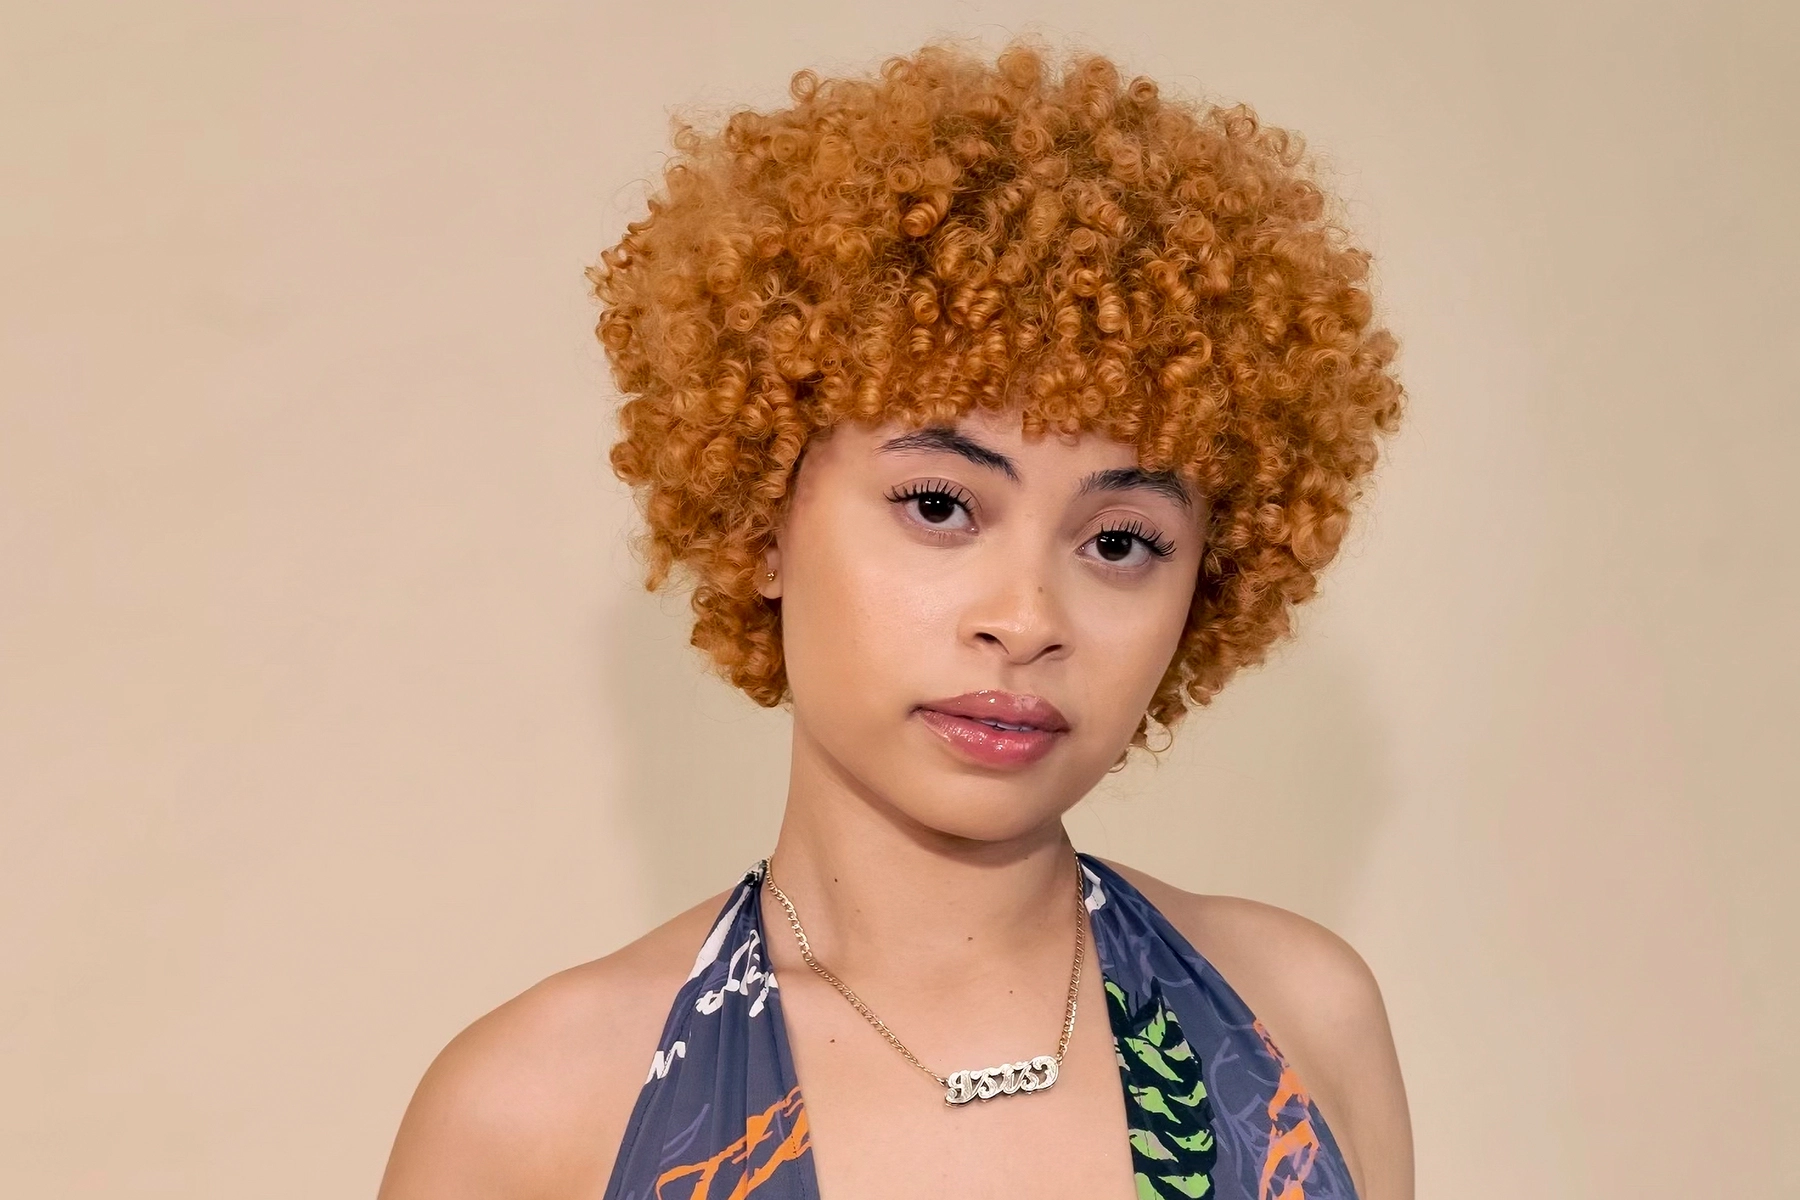 Ice Spice responds to talk that colorism is the reason she blew up